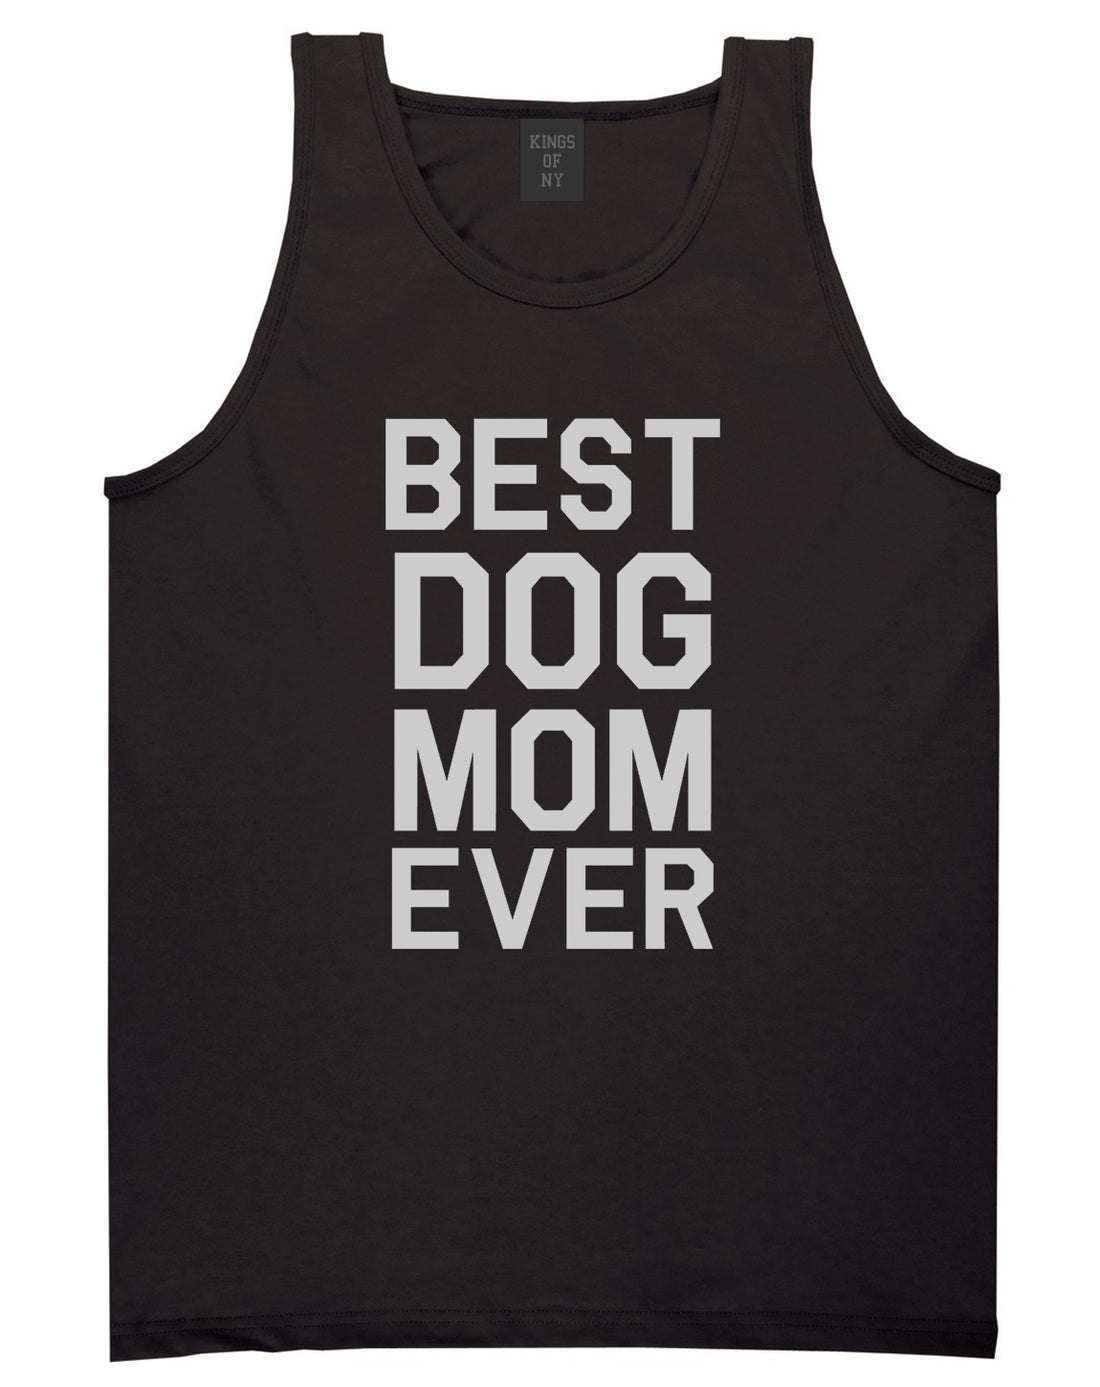 Best_Dog_Mom_Ever Mens Black Tank Top Shirt by Kings Of NY